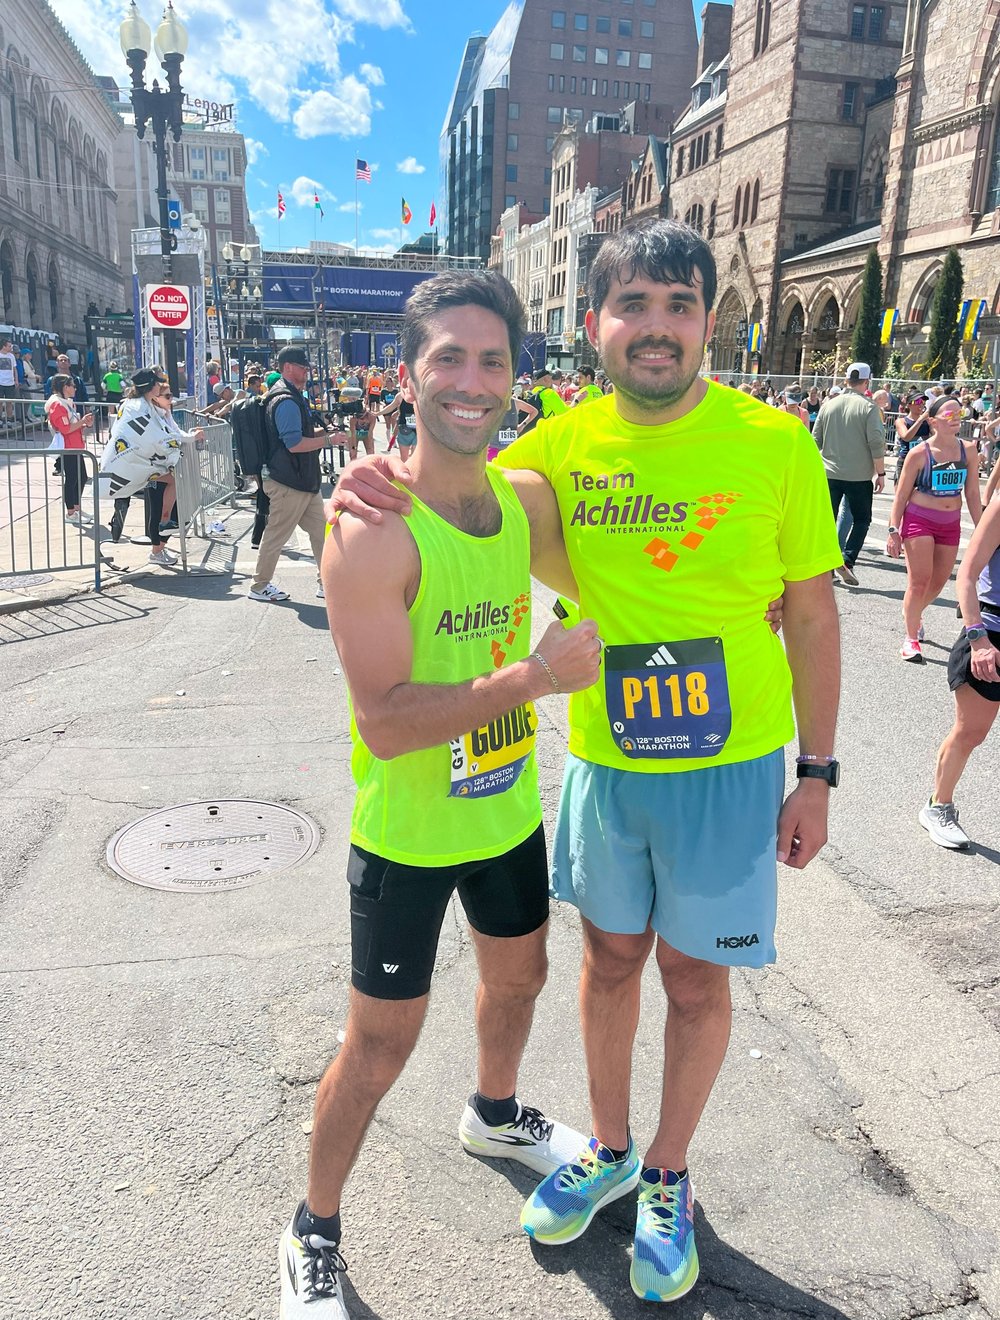  Francesco Magisano smiling with Nev Schulman at the finish line 